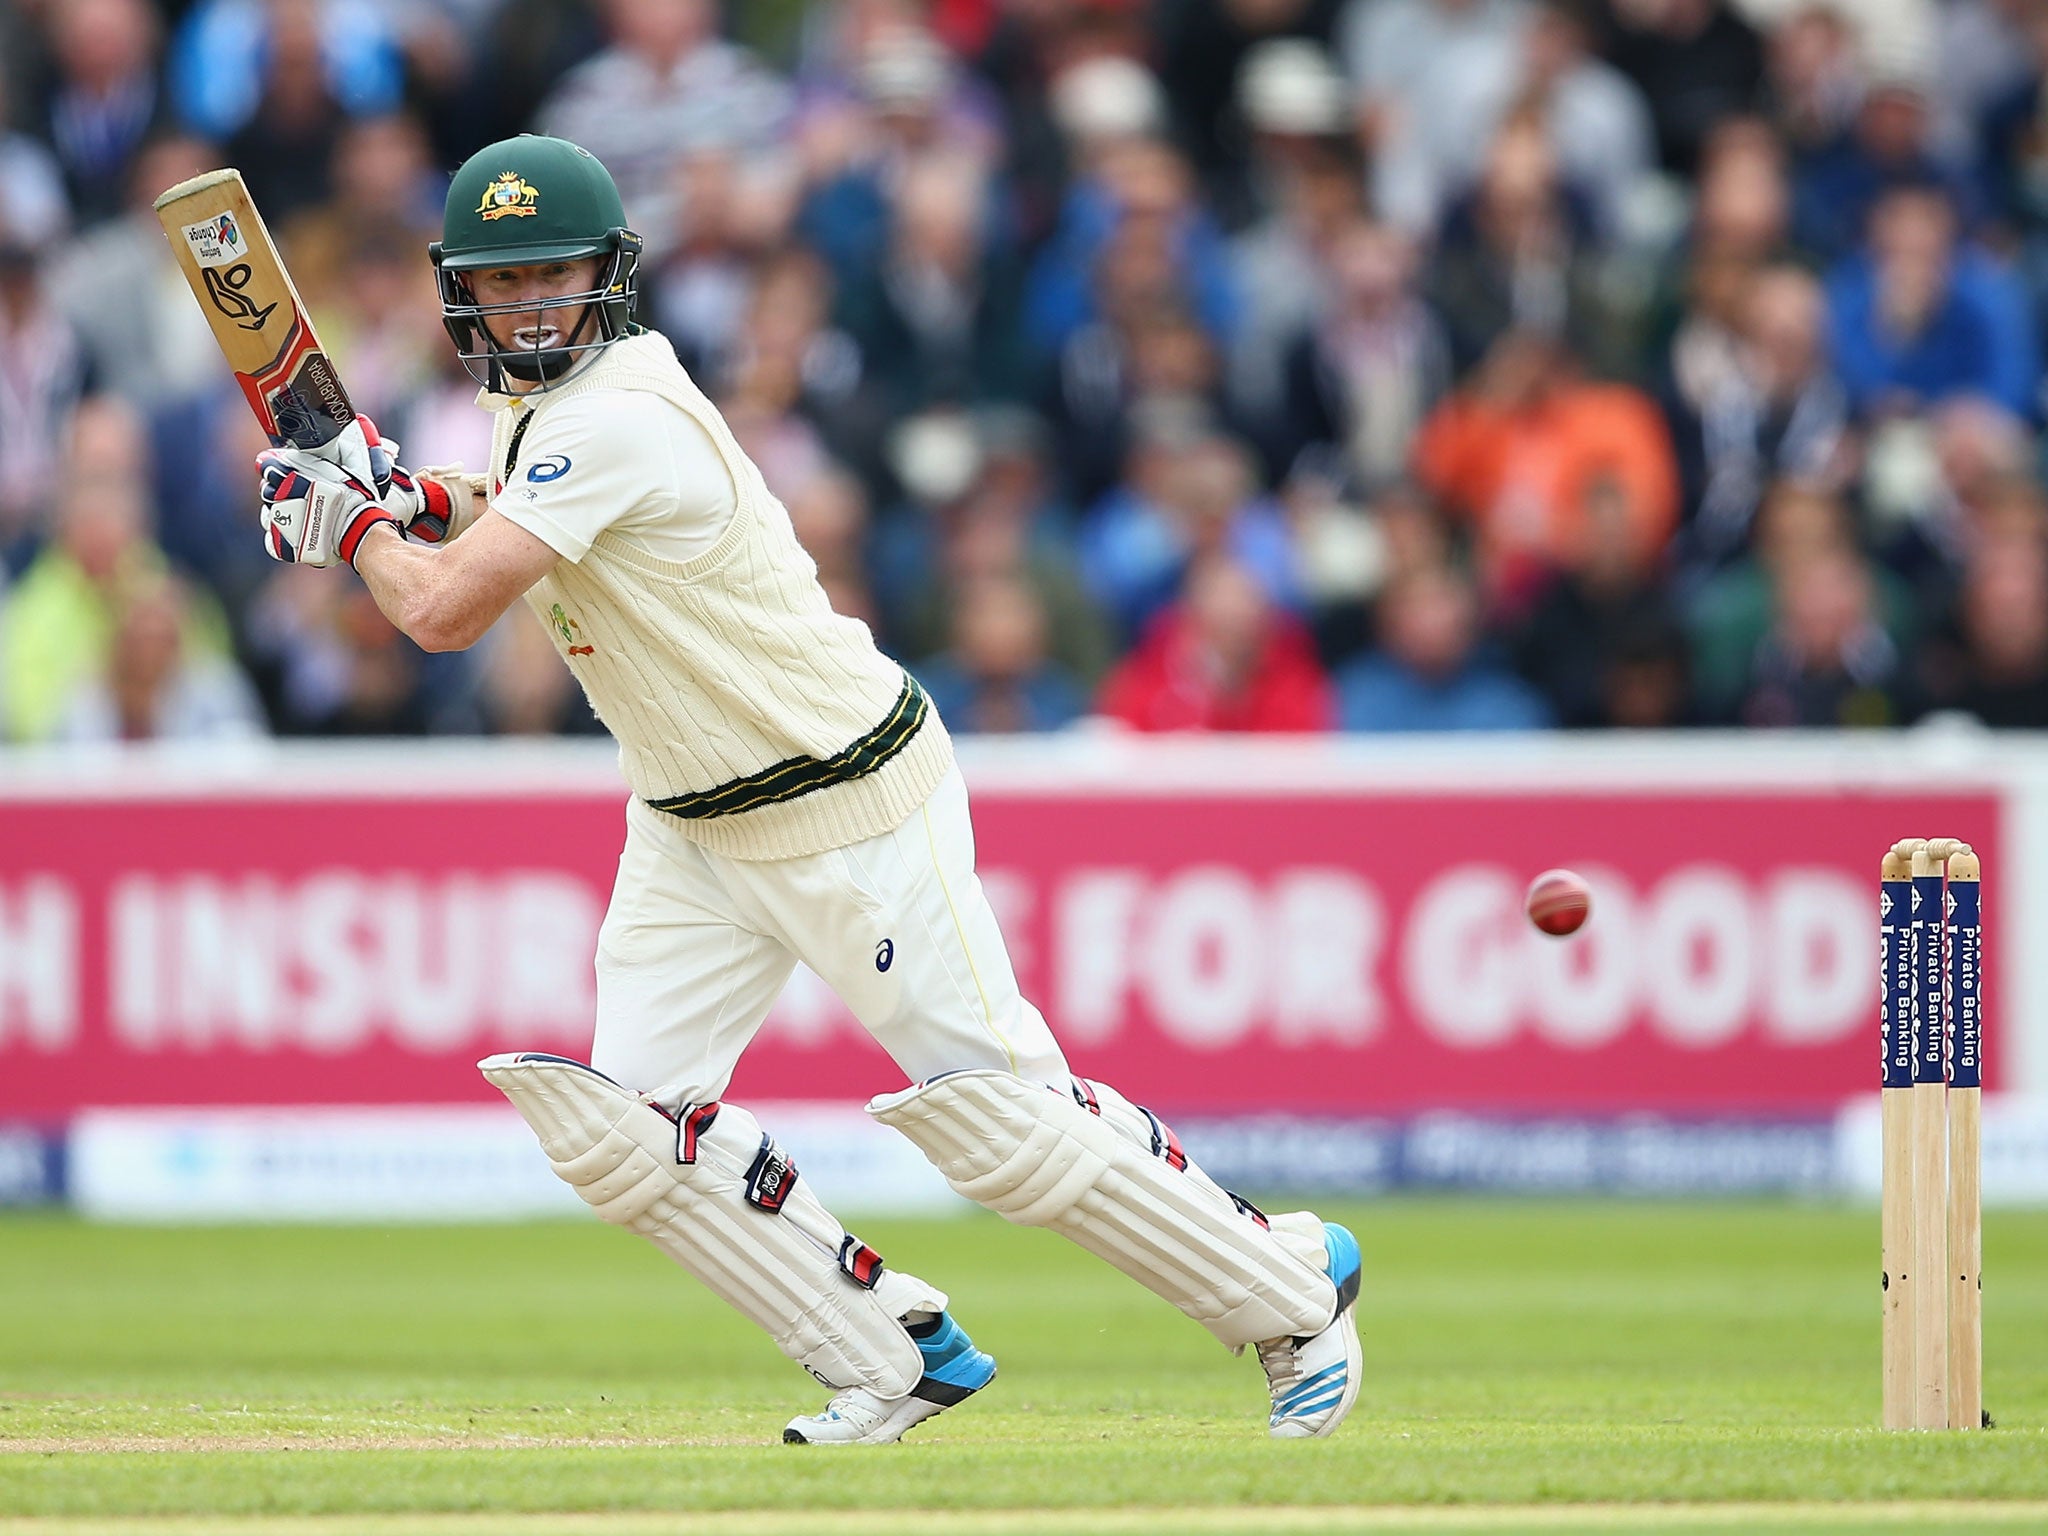 Chris Rogers reached his 50 despite the Australian collapse around him